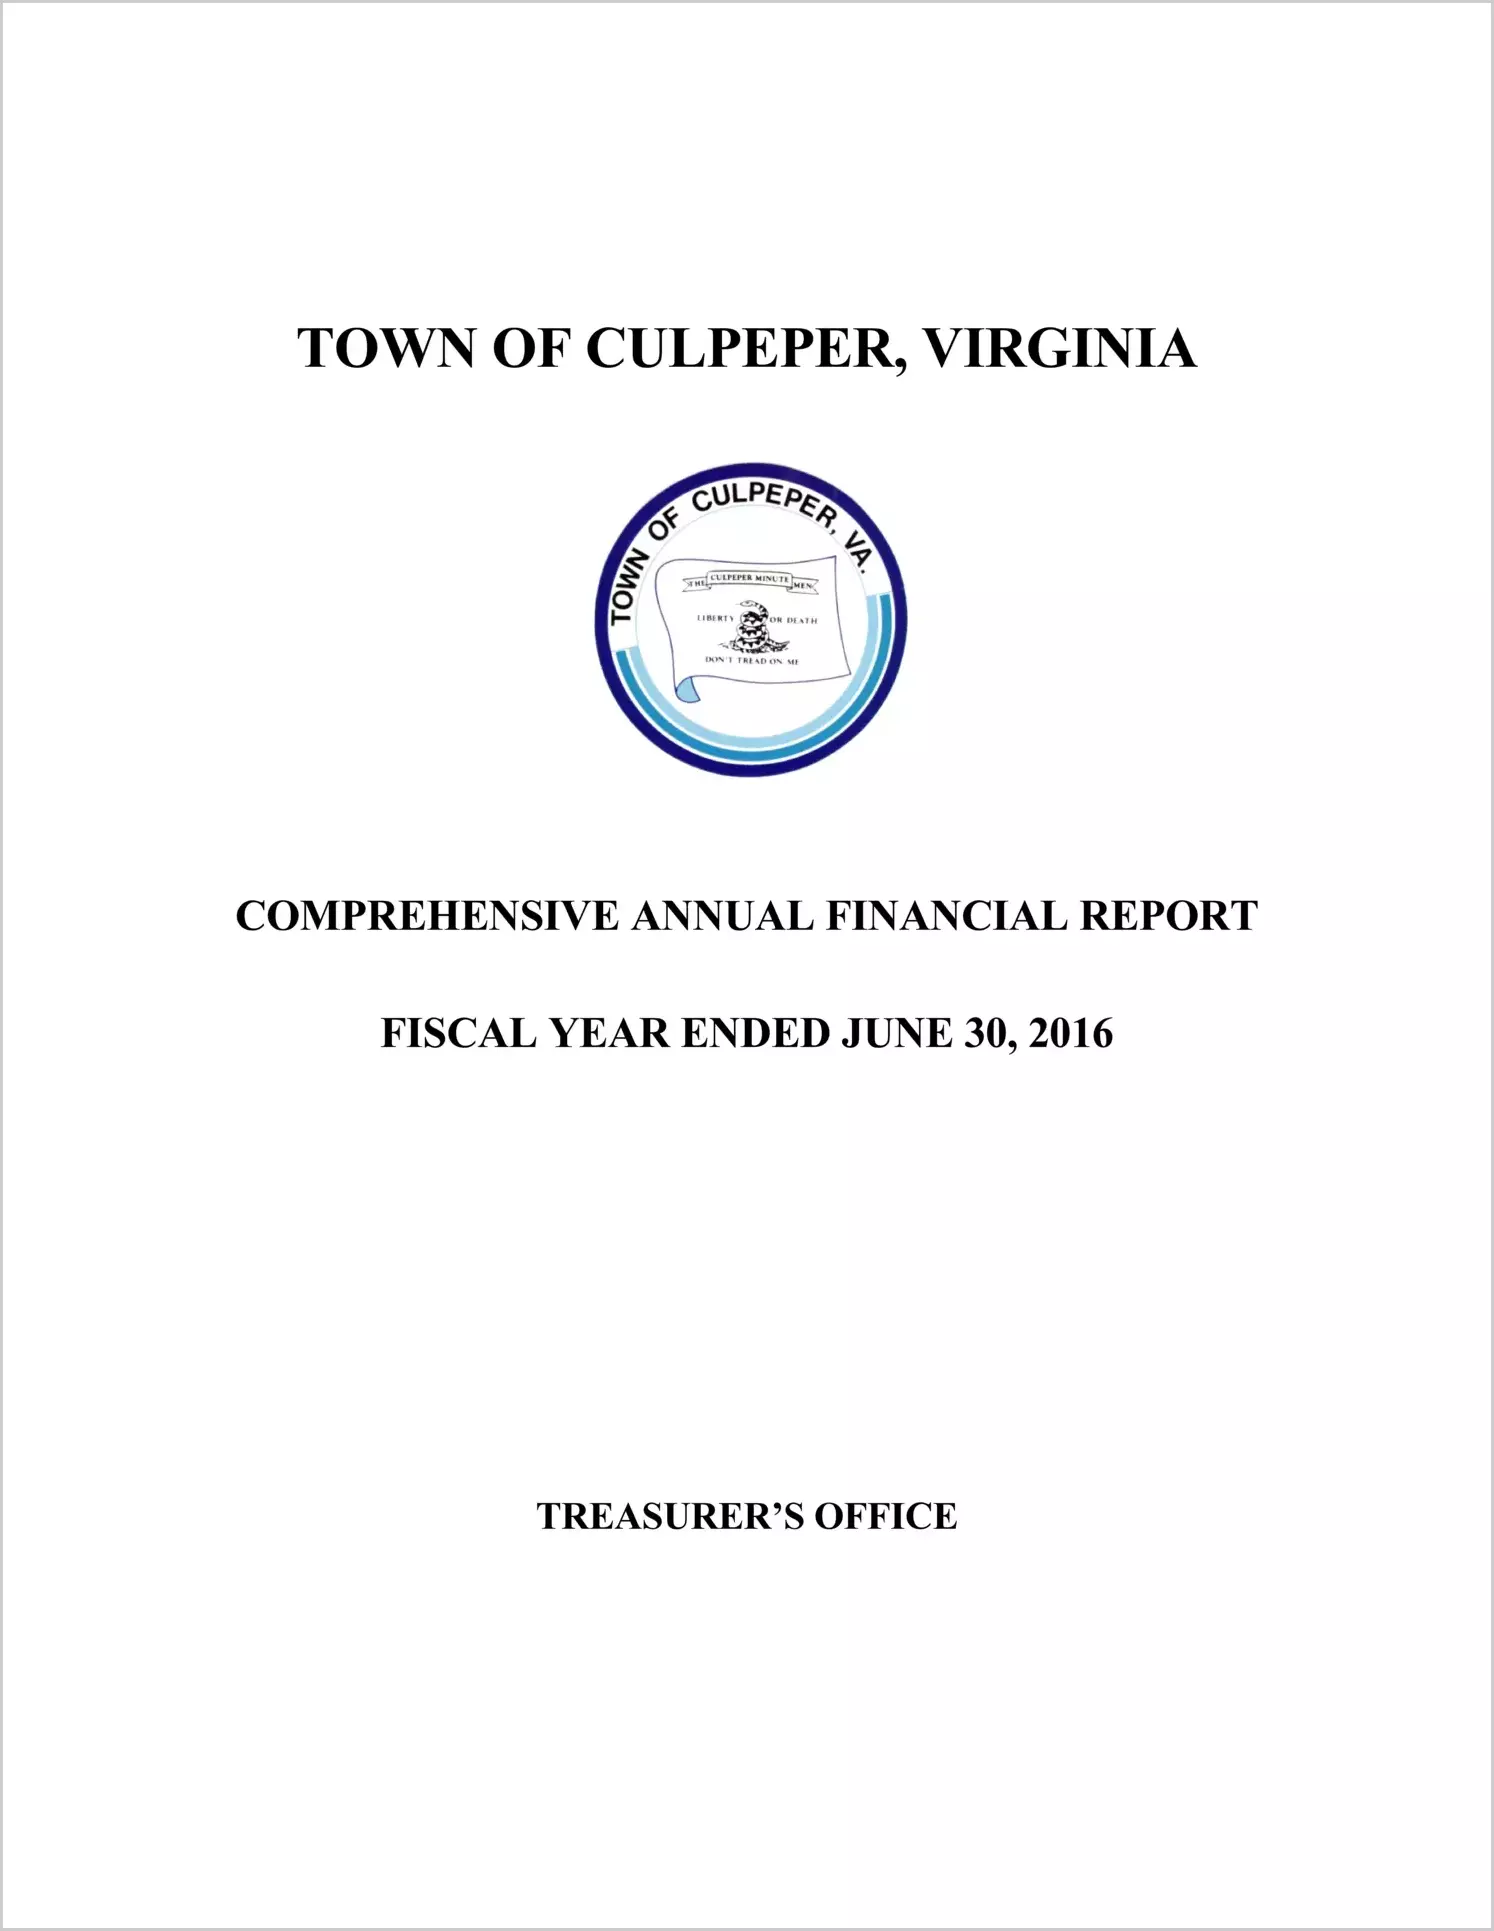 2016 Annual Financial Report for Town of Culpeper